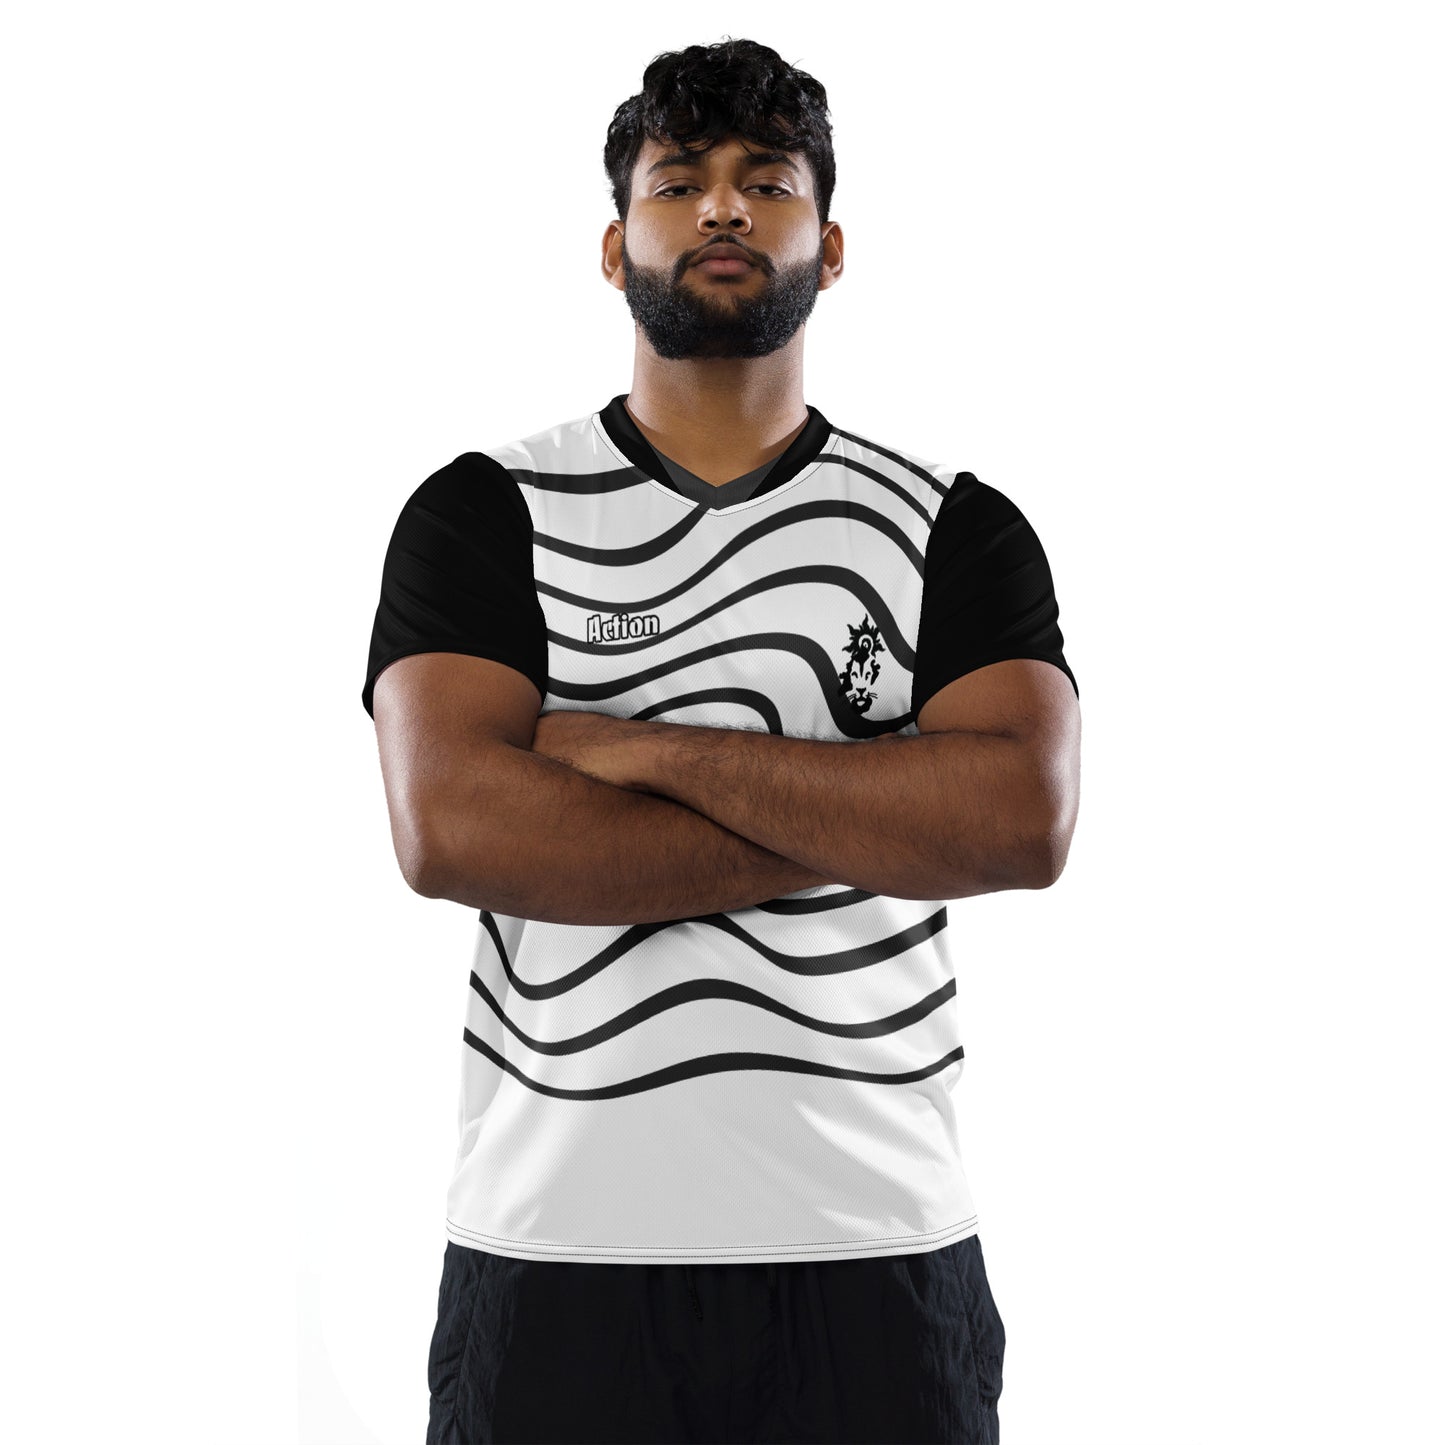 Recycled unisex sports jersey ActSun 7